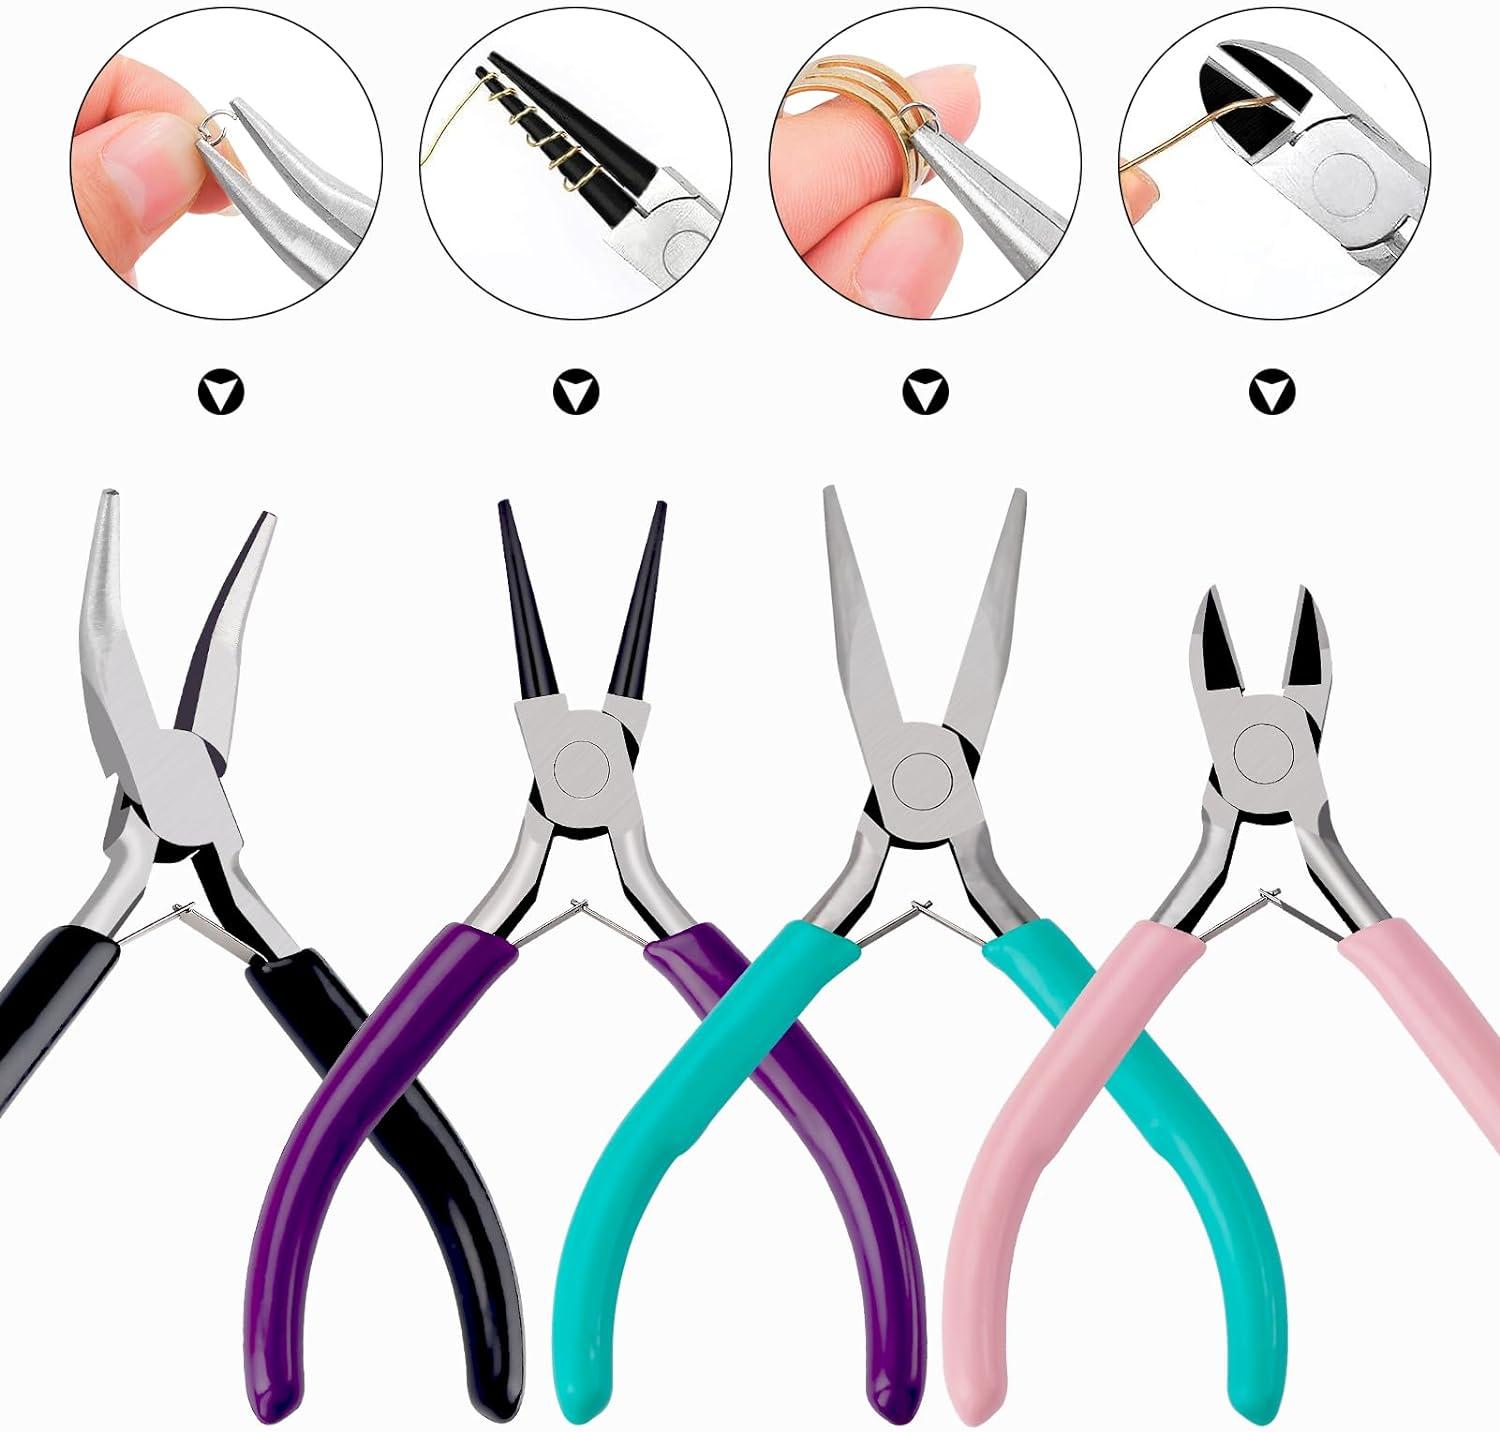 4 Pack Jewelry Pliers Jewelry Making Pliers Tools Kit with Needle Nose  Pliers/Chain Nose Pliers Round Nose Pliers Bent Nose Pliers Wire Cutters  for Wire Wrapping Earring Craft Making Supplies Mix Color